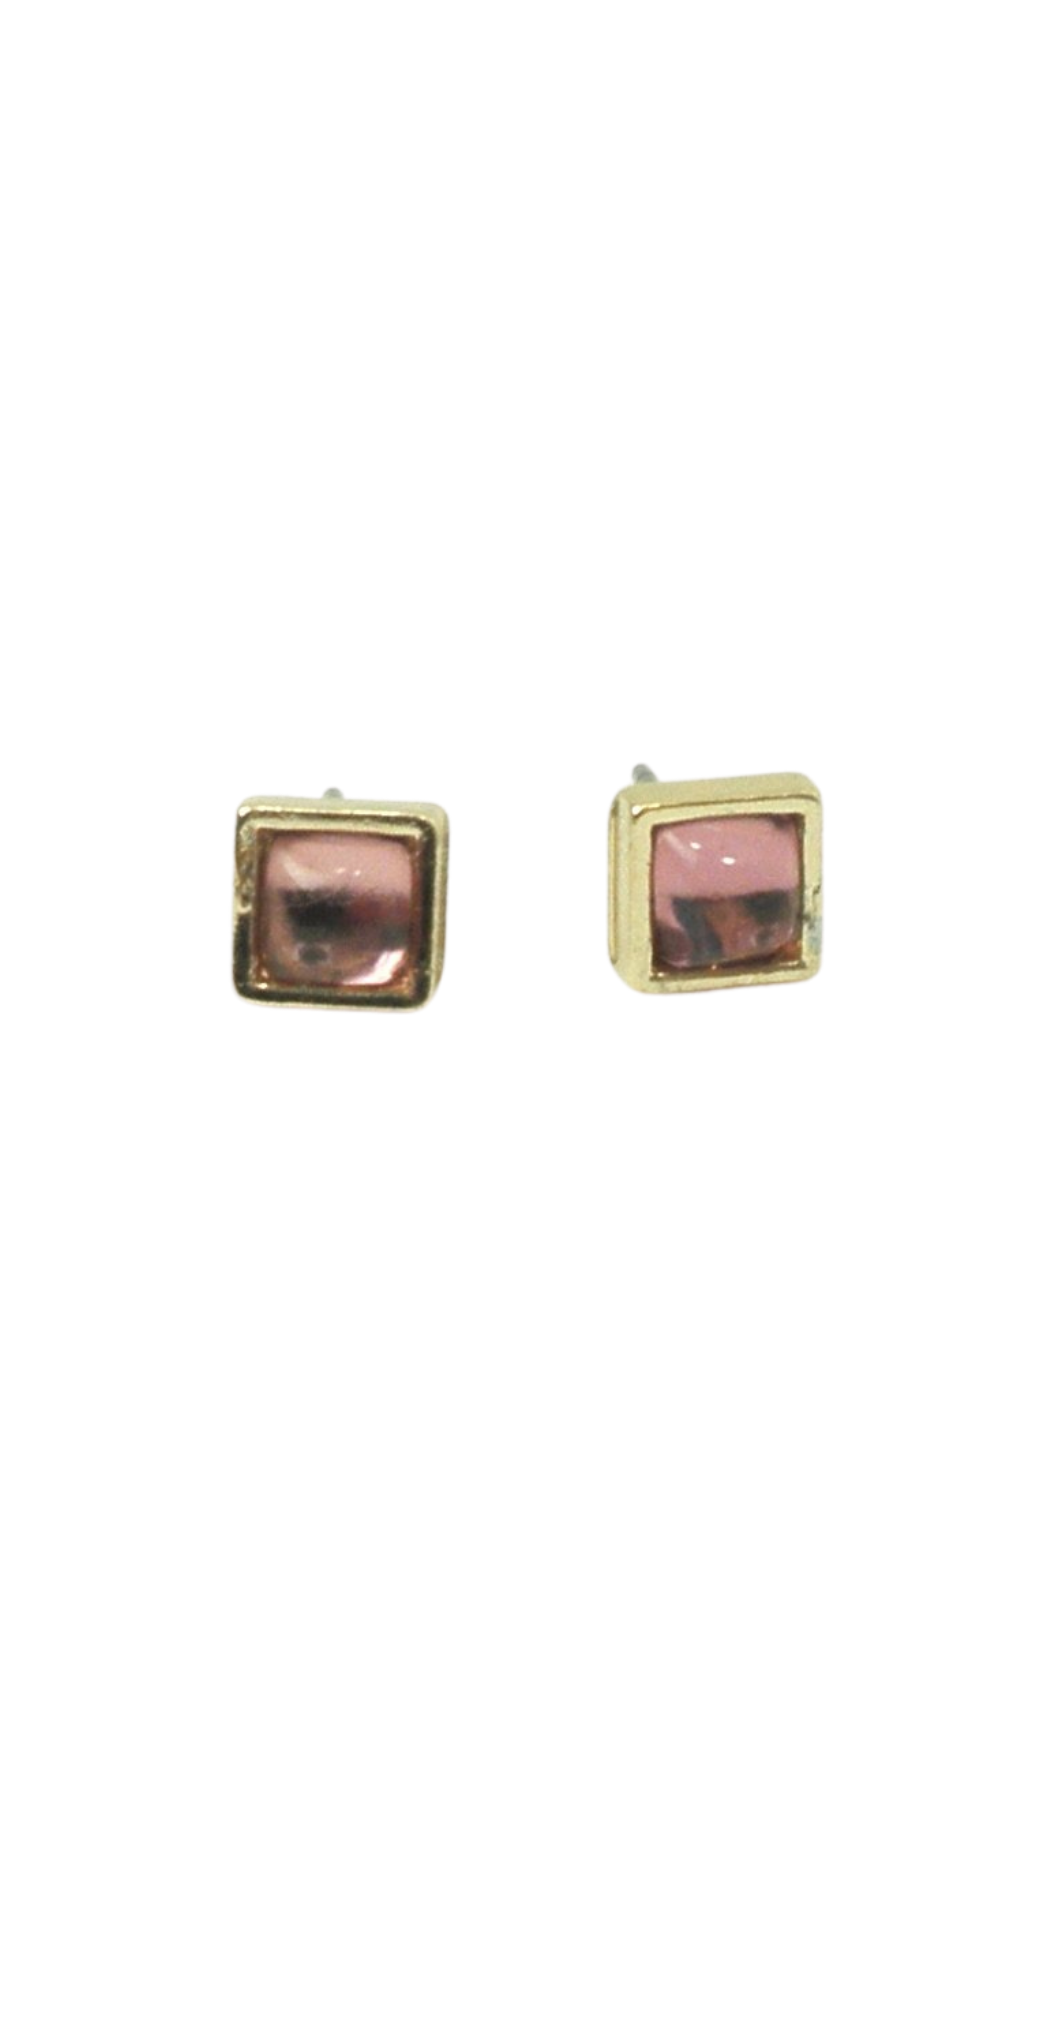 Gold Square Studs with Shiny Pink Design - The Fashion Foundation - {{ discount designer}}